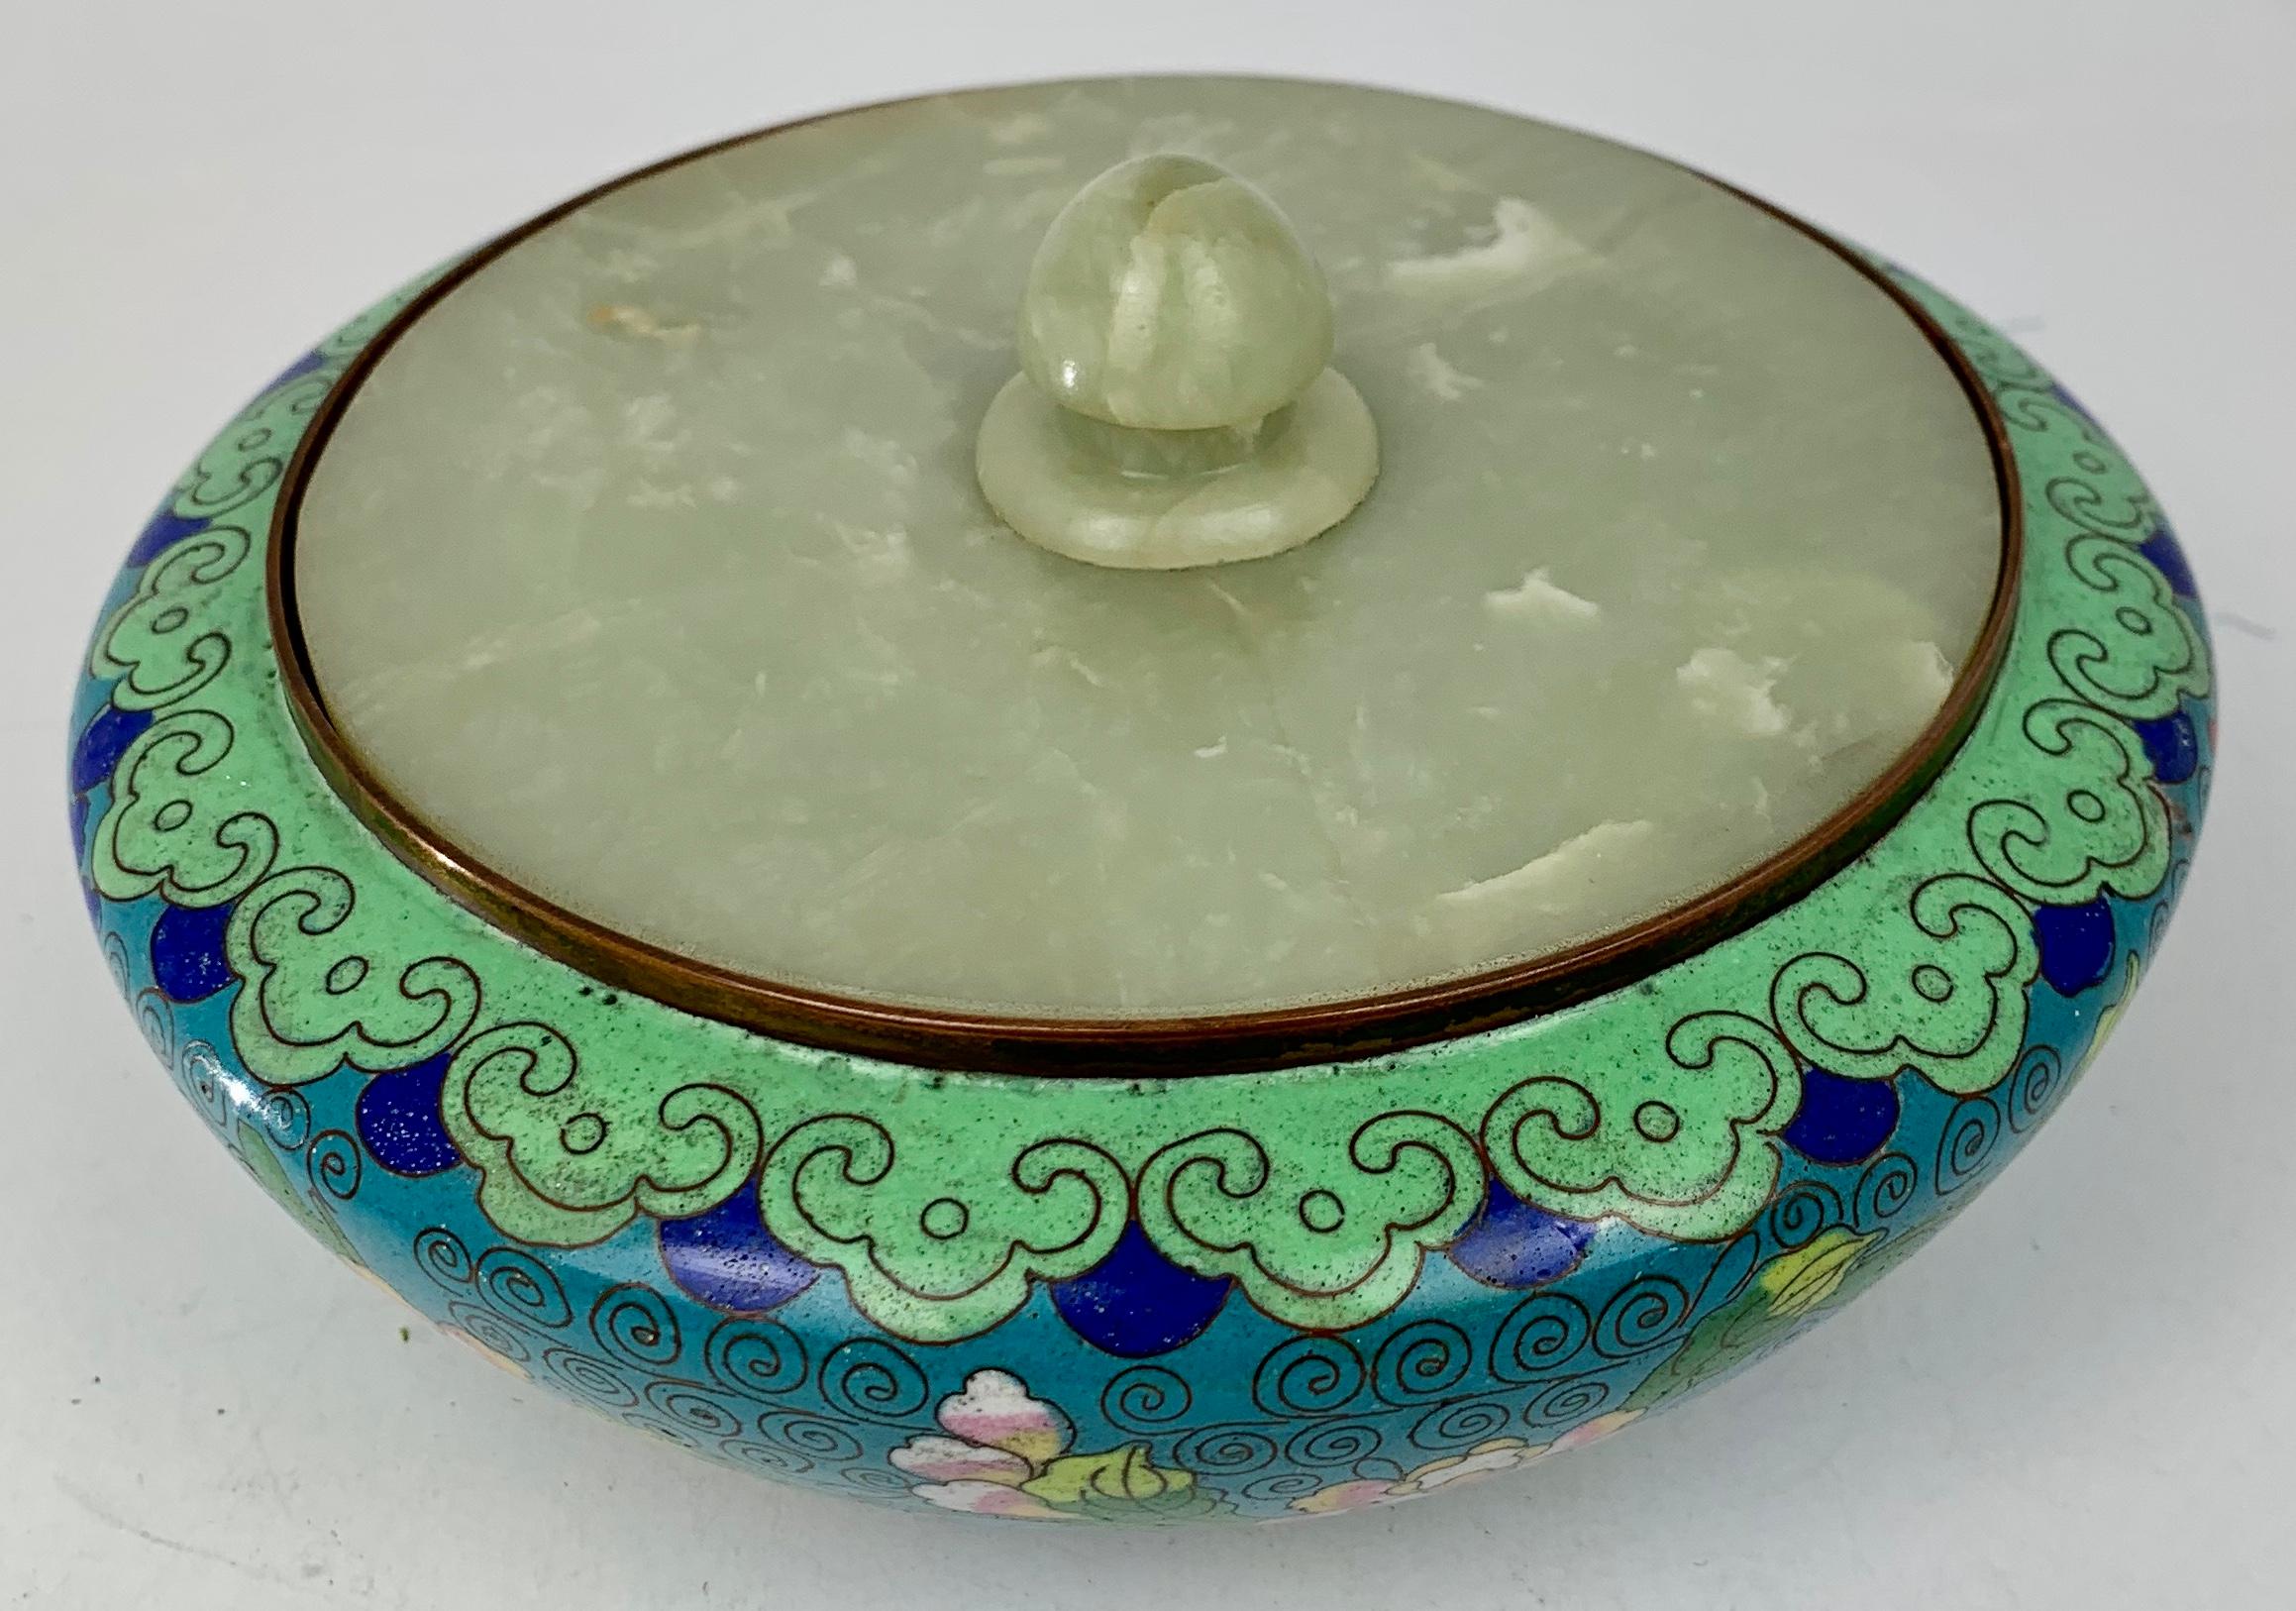 Chinese cloisonné bowl with jade cover. The ground color of the bowl, inside and out, is a deep turquoise. The exterior decoration is of pink, red and blue flowers and their leaves in shaded enamels. The cloisons are in a scroll shape and forming a